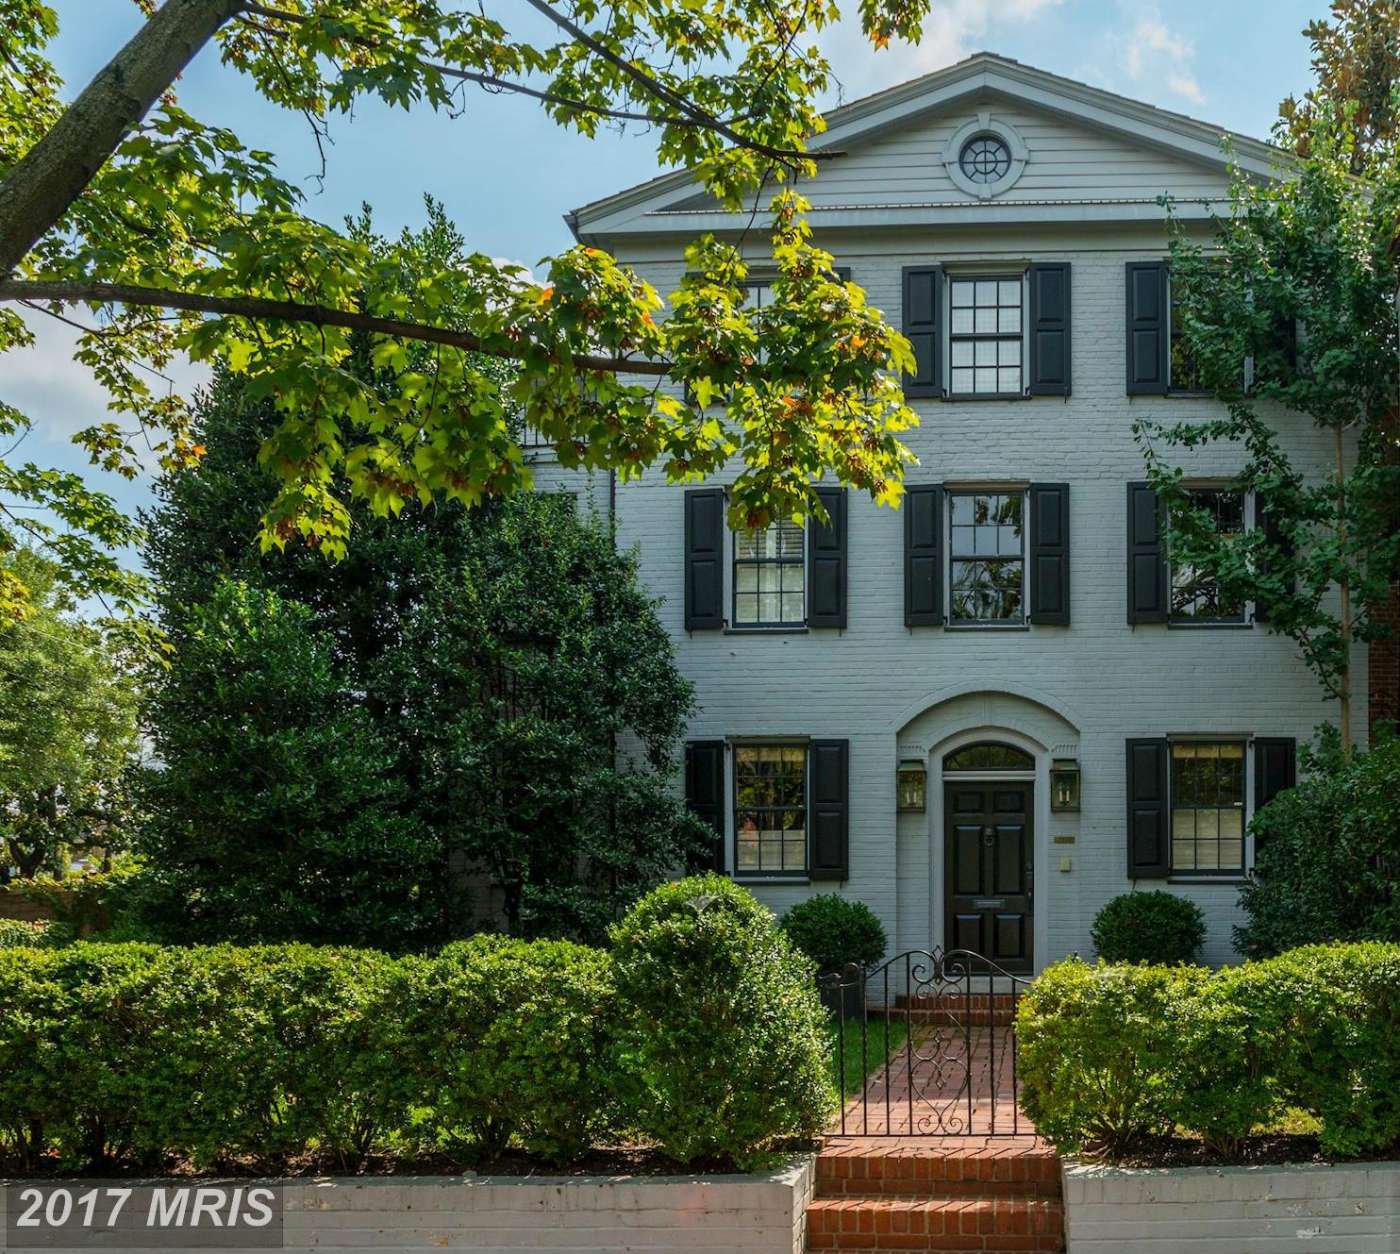 7. $3,900,000

2816 O Street NW
Washington, D.C.
This home in the Georgetown neighborhood of D.C. has five bedrooms, four bedrooms and one half-bath. (Courtesy MRIS, a Bright MLS)